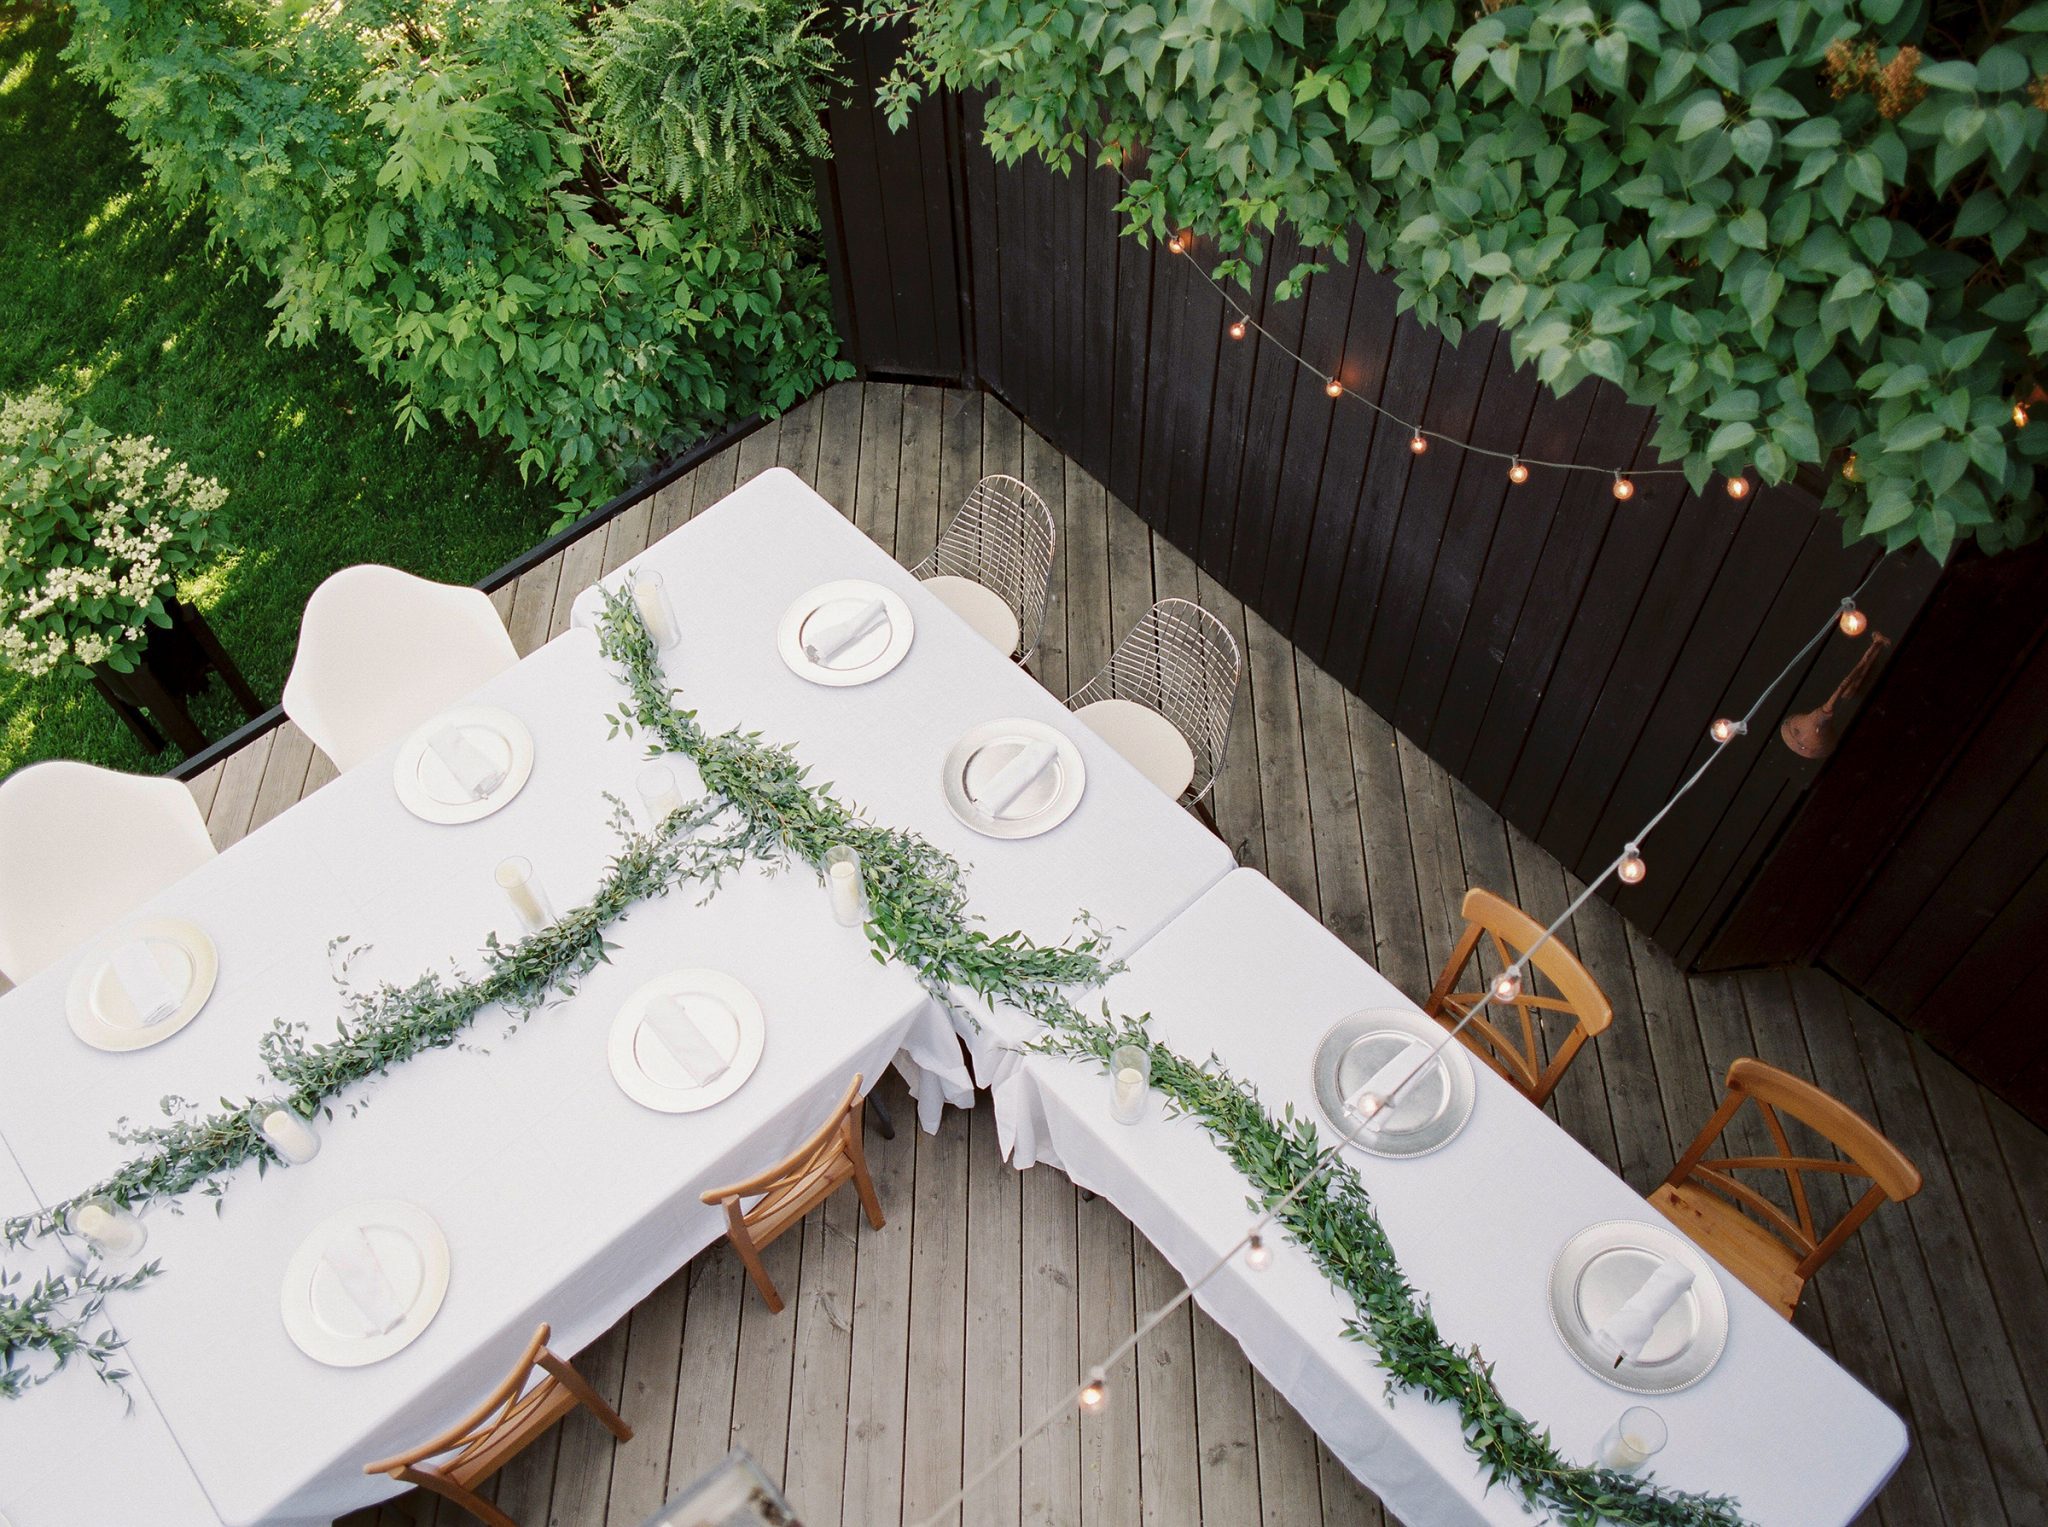 This Intimate Backyard Wedding with only 9 guests! - Edmonton Alberta Backyard Wedding 2020 Featured on Bronte Bride